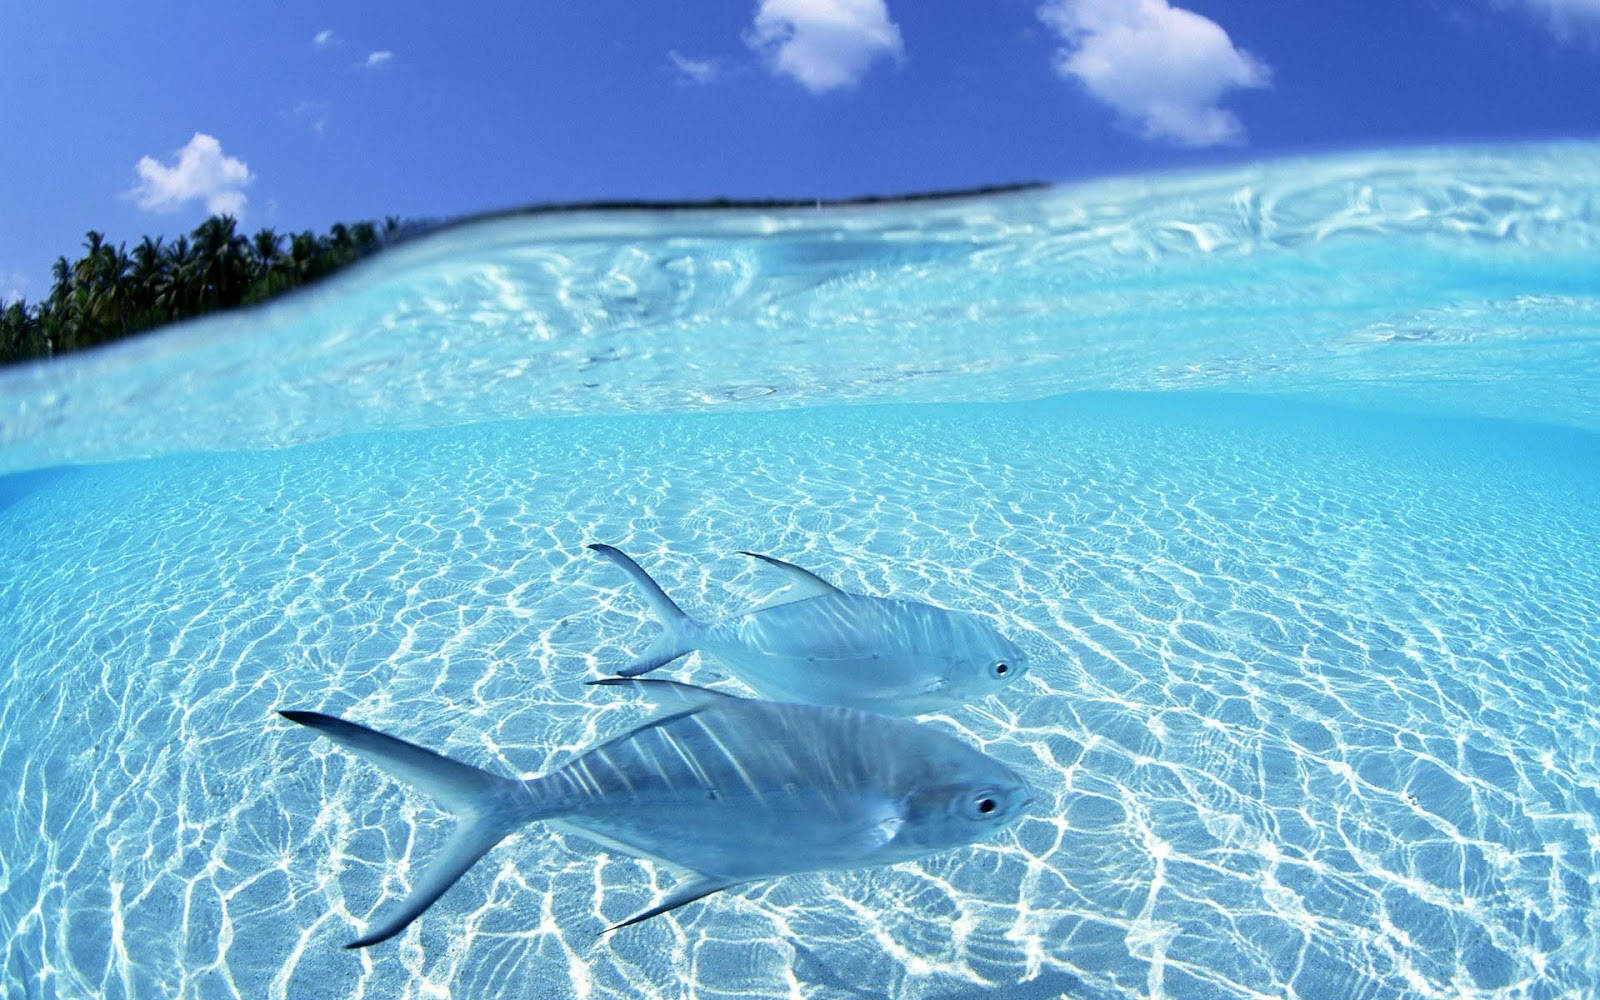 Cool Fish And Clear Water